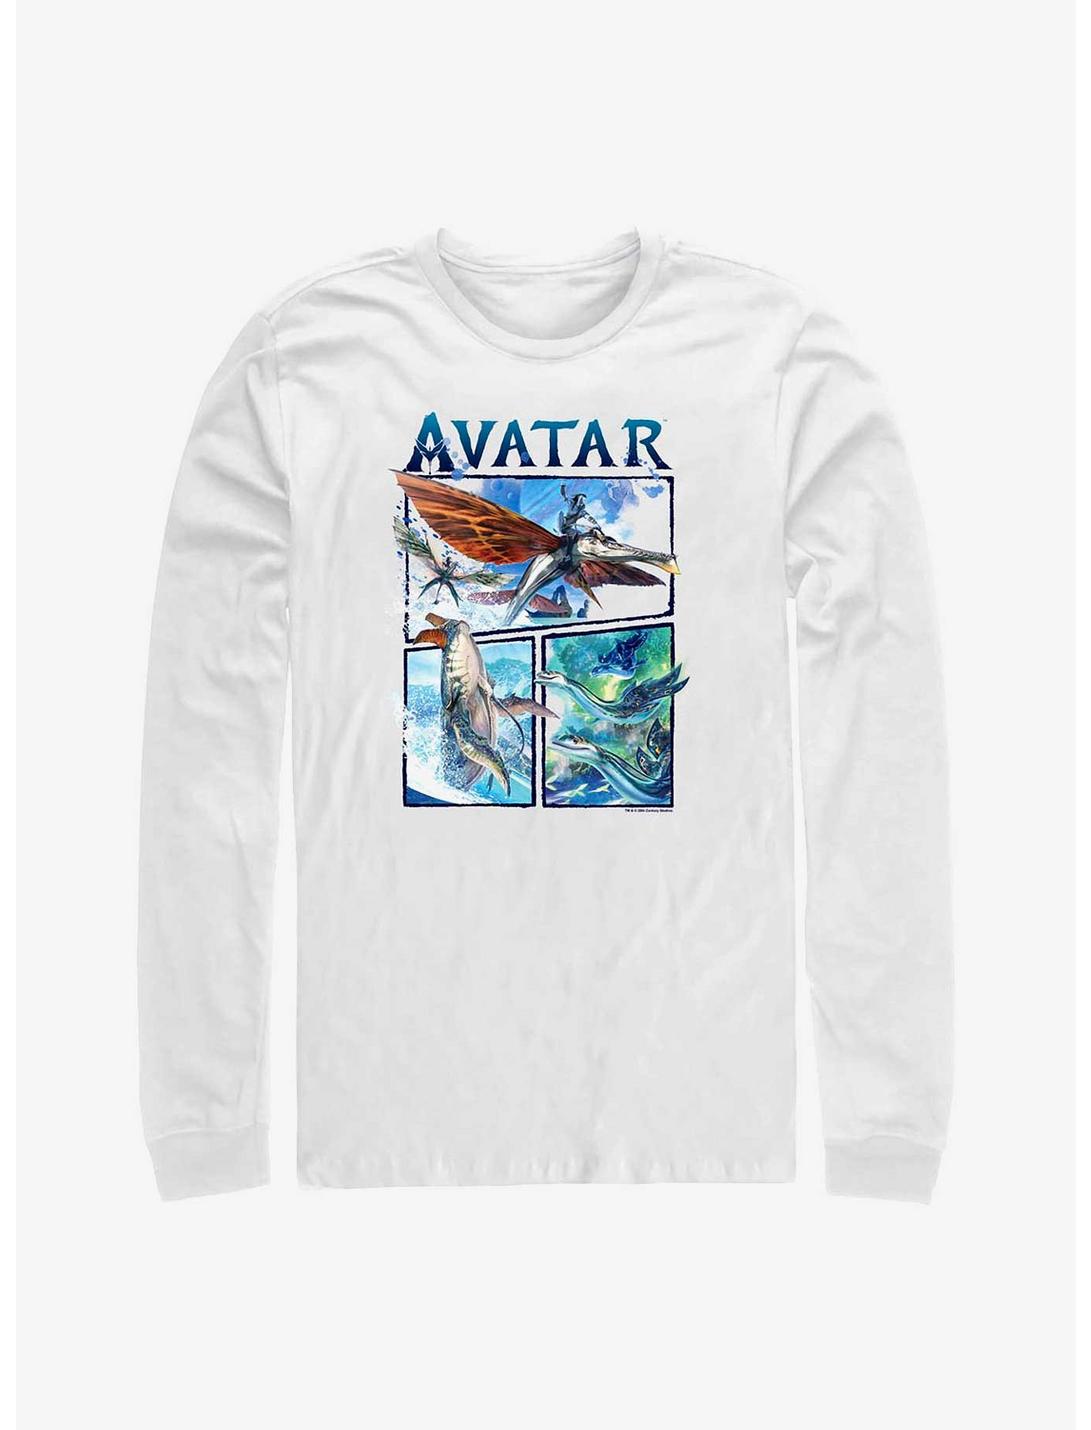 Avatar: The Way Of The Water Creatures Air And Sea Long-Sleeve T-Shirt, WHITE, hi-res